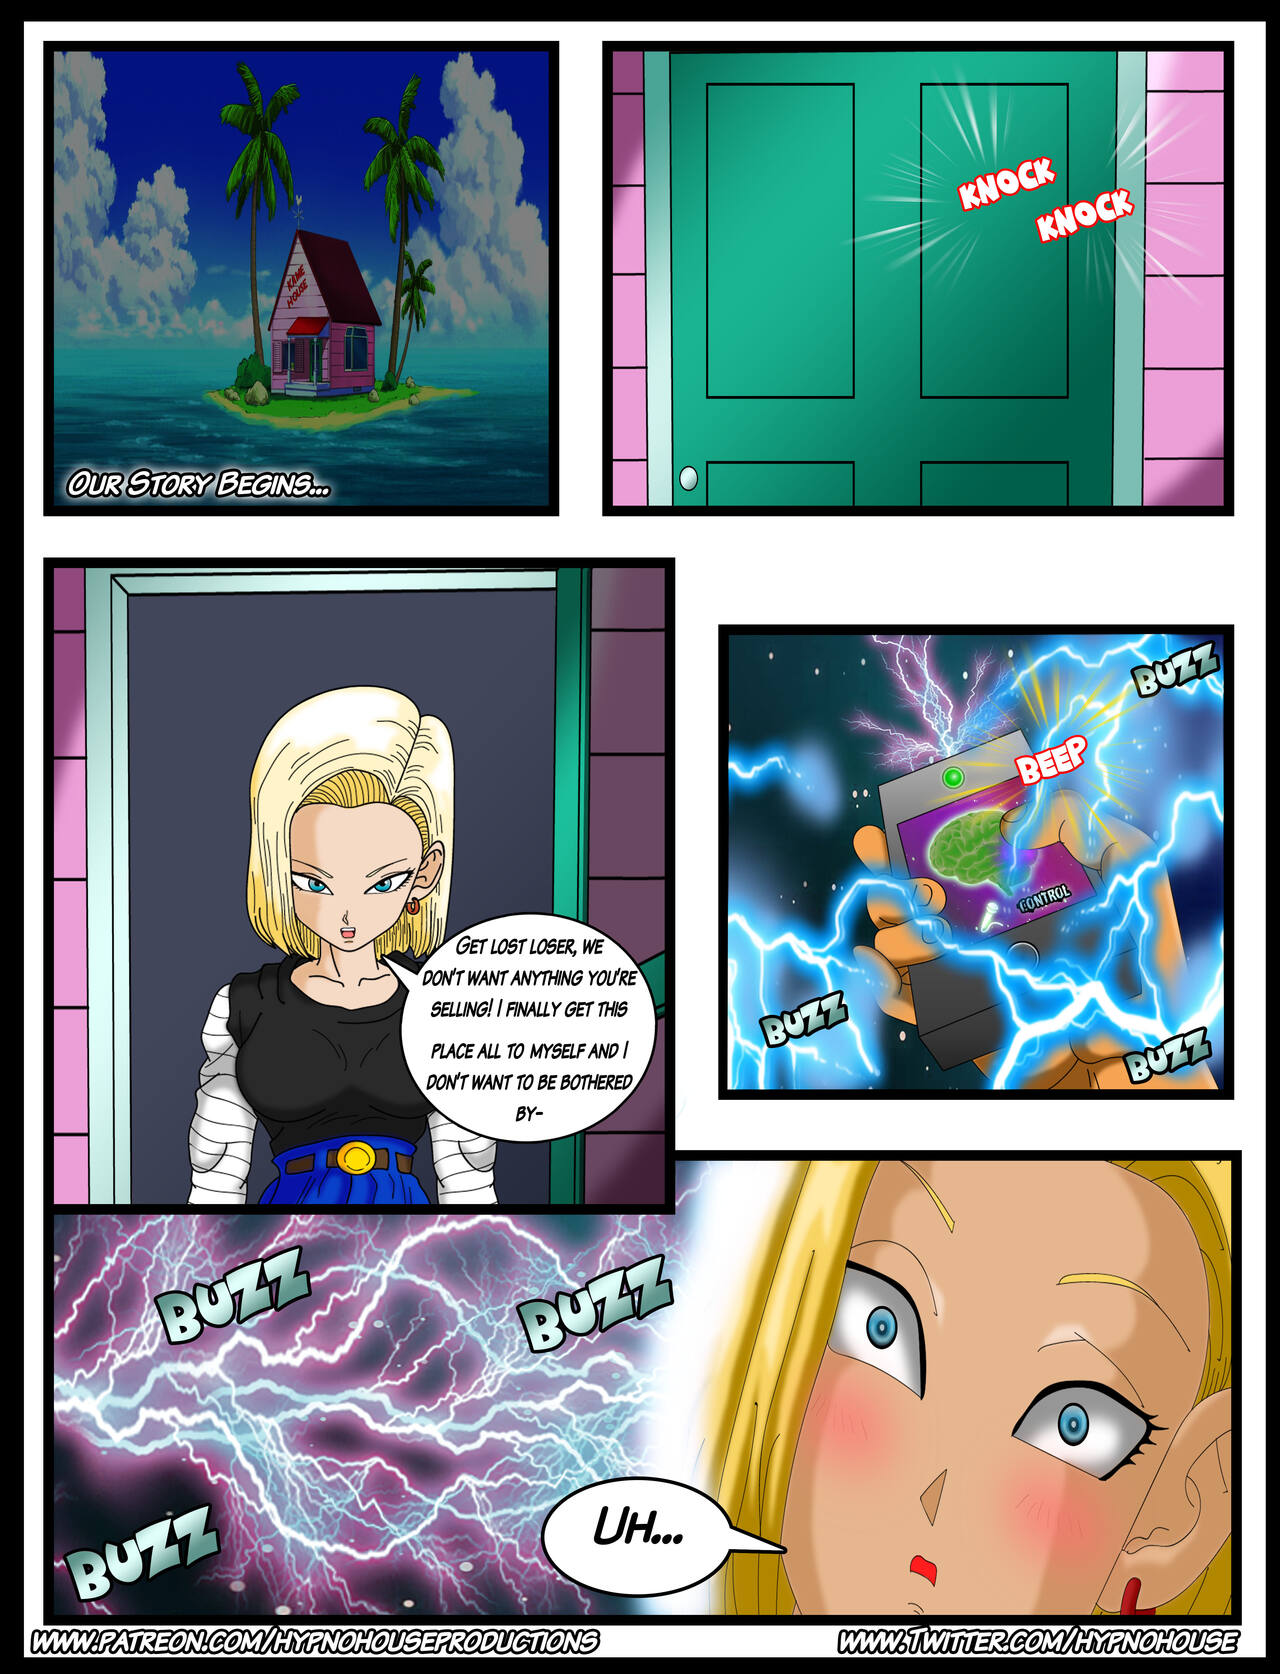 Dragon Ball Z Android 18 Porn Caption - Double Feature Android 18 & Bulma is Yours - KingComiX.com